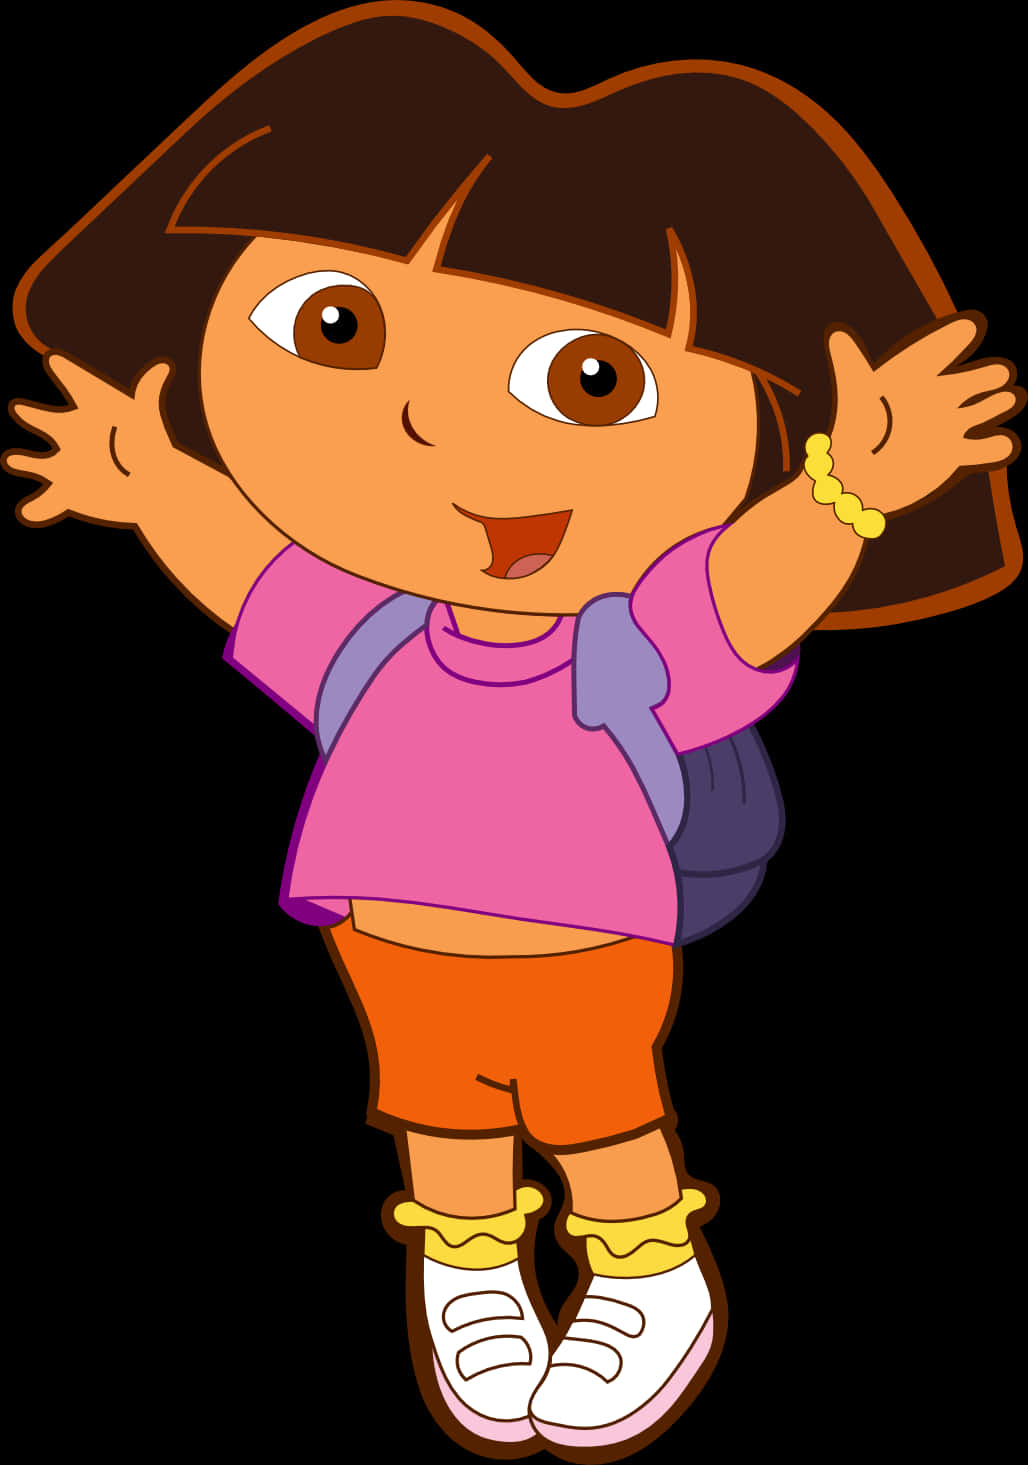 Cartoon Of A Girl With Her Arms Up